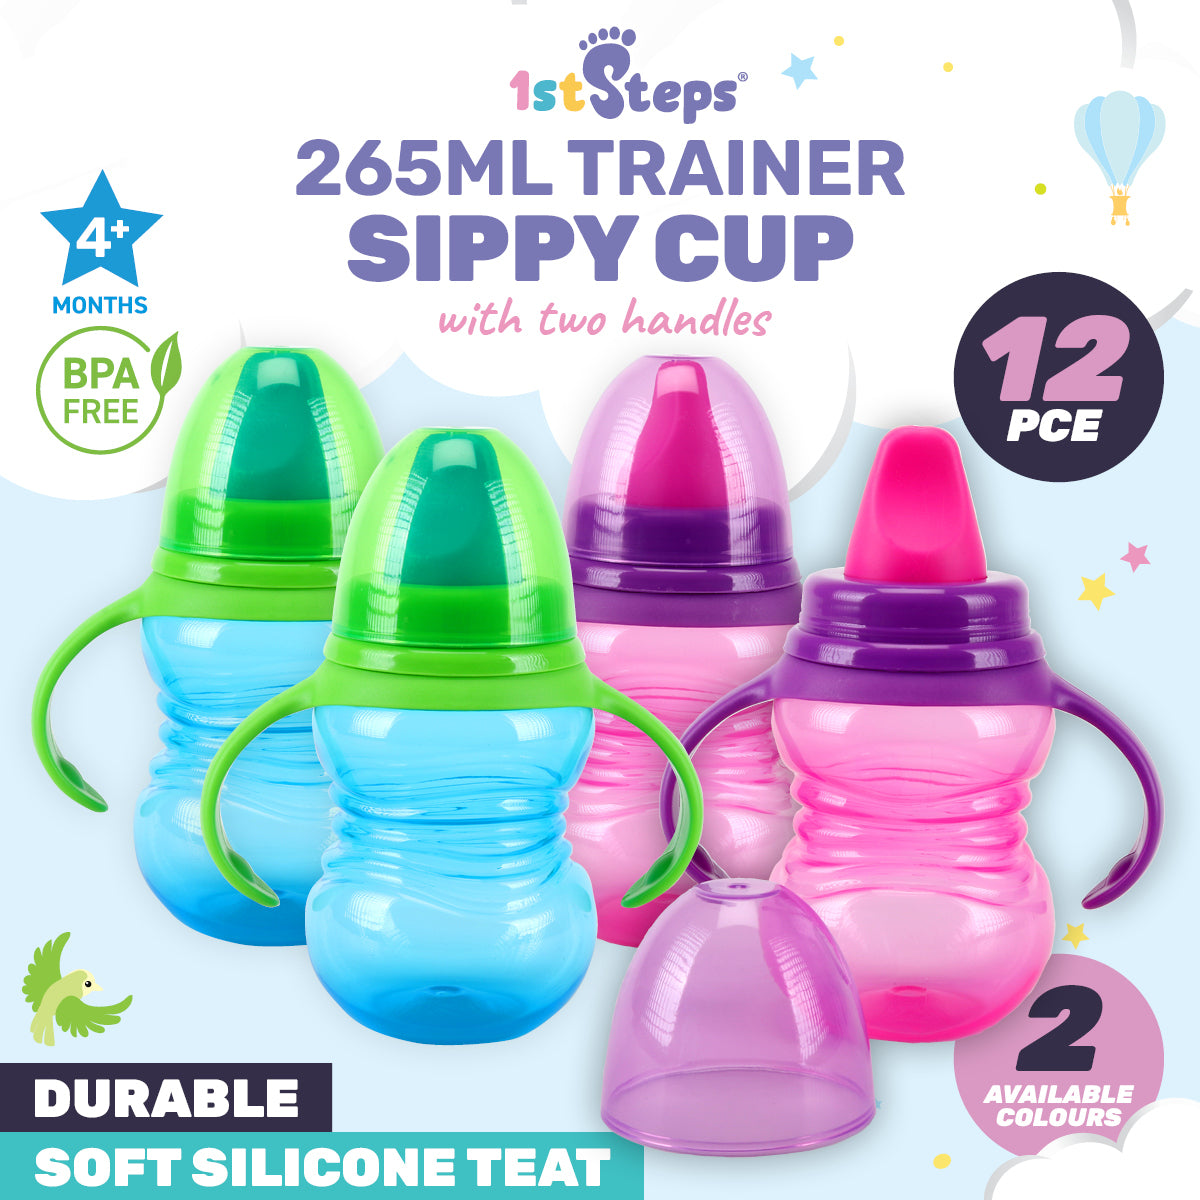 1st Steps 12PCE 265ml Sippy Cups Removable Handles Soft Silicone Teats